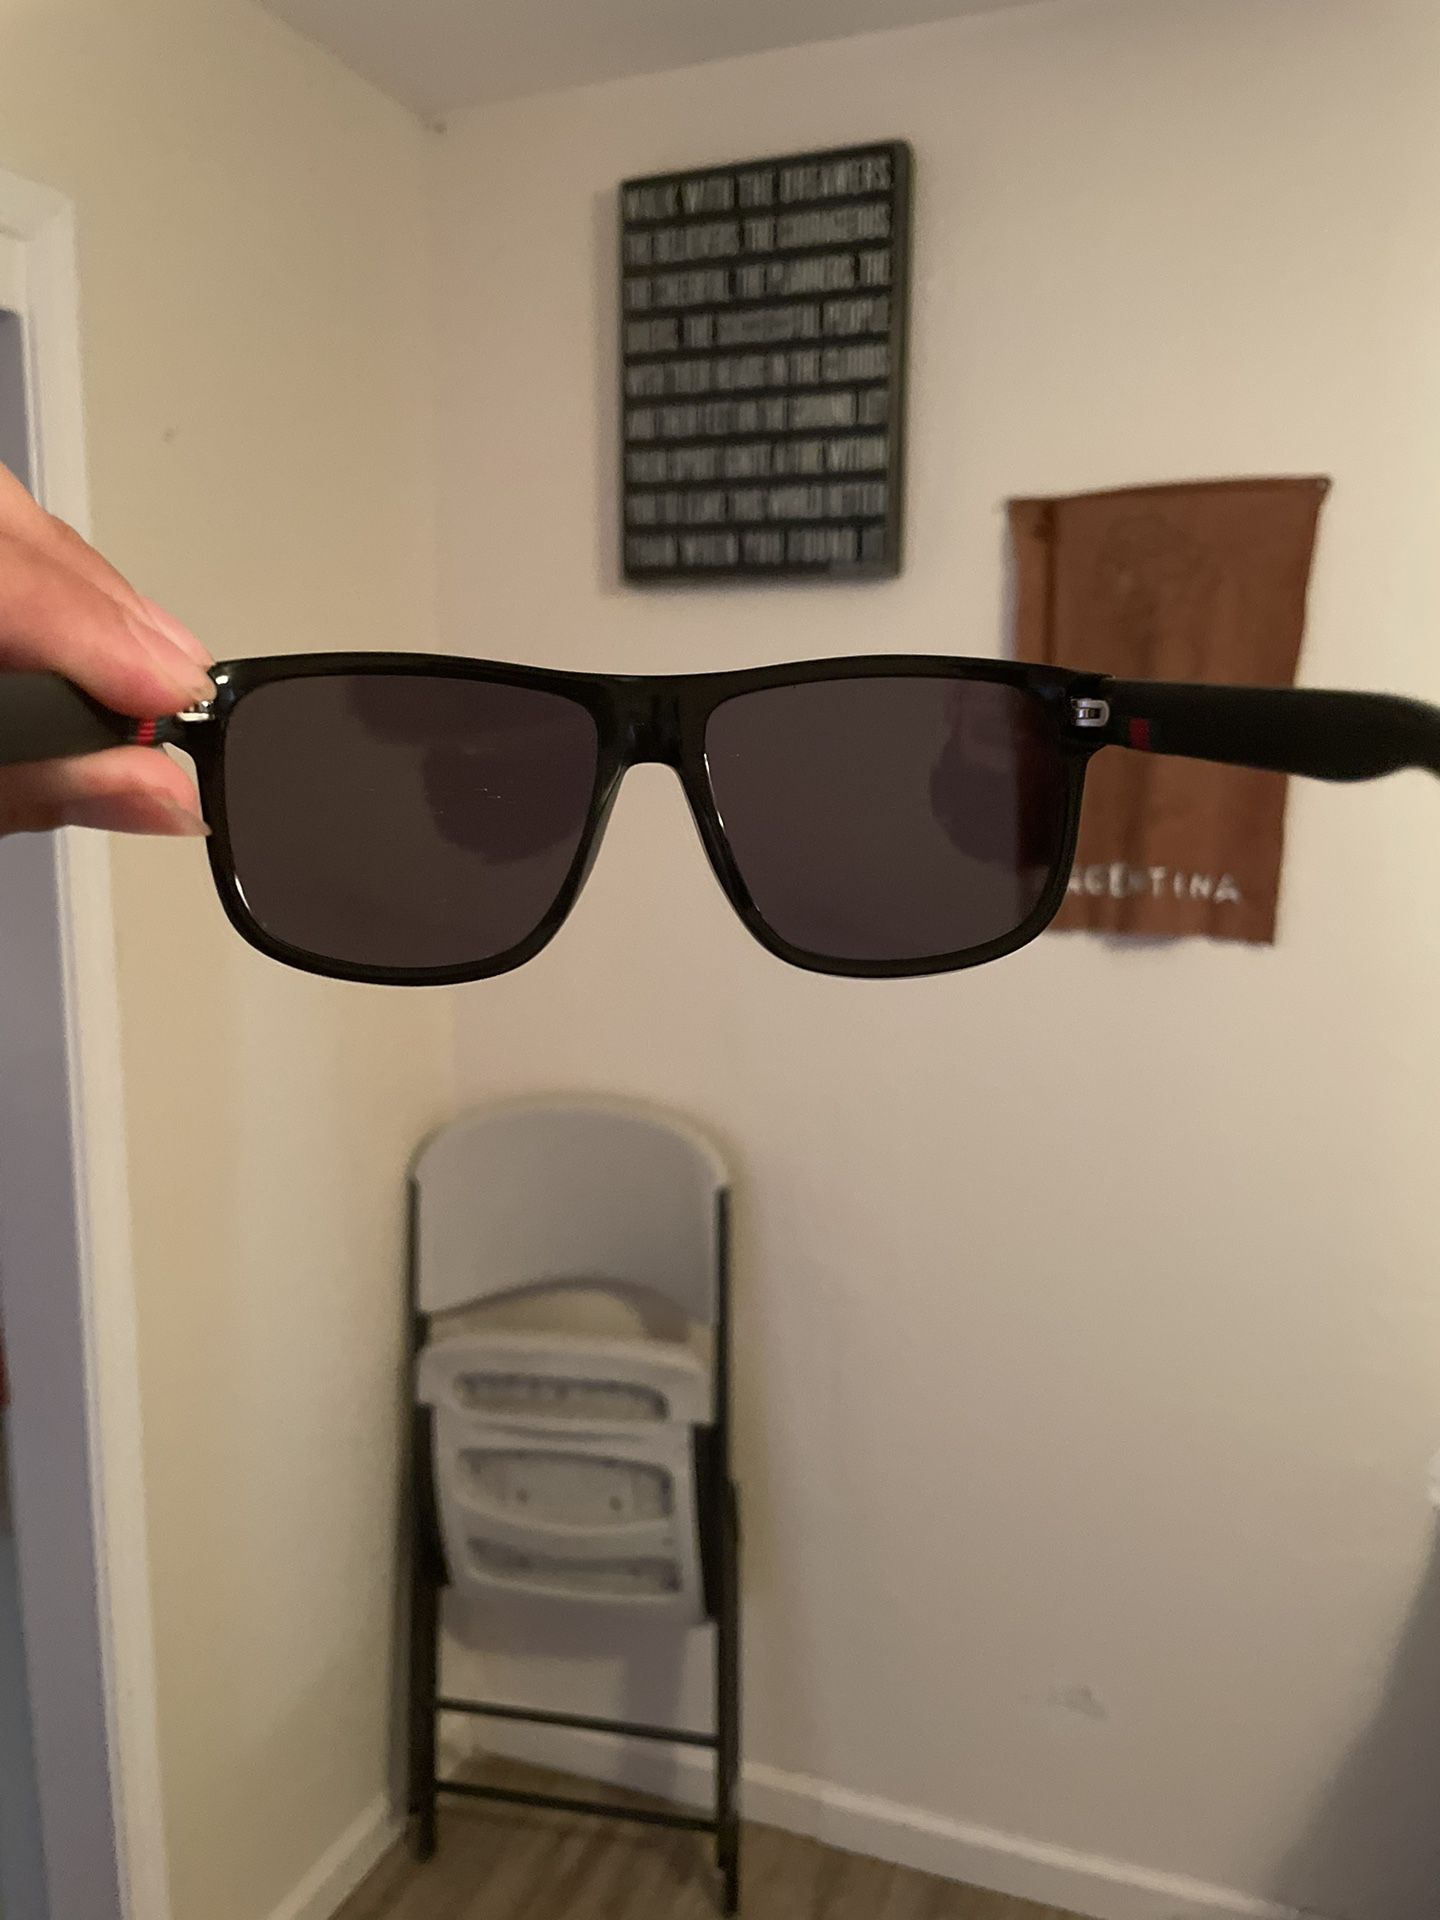 Only used 3-4 times original Gucci shades have serial code payed $400 asking $240